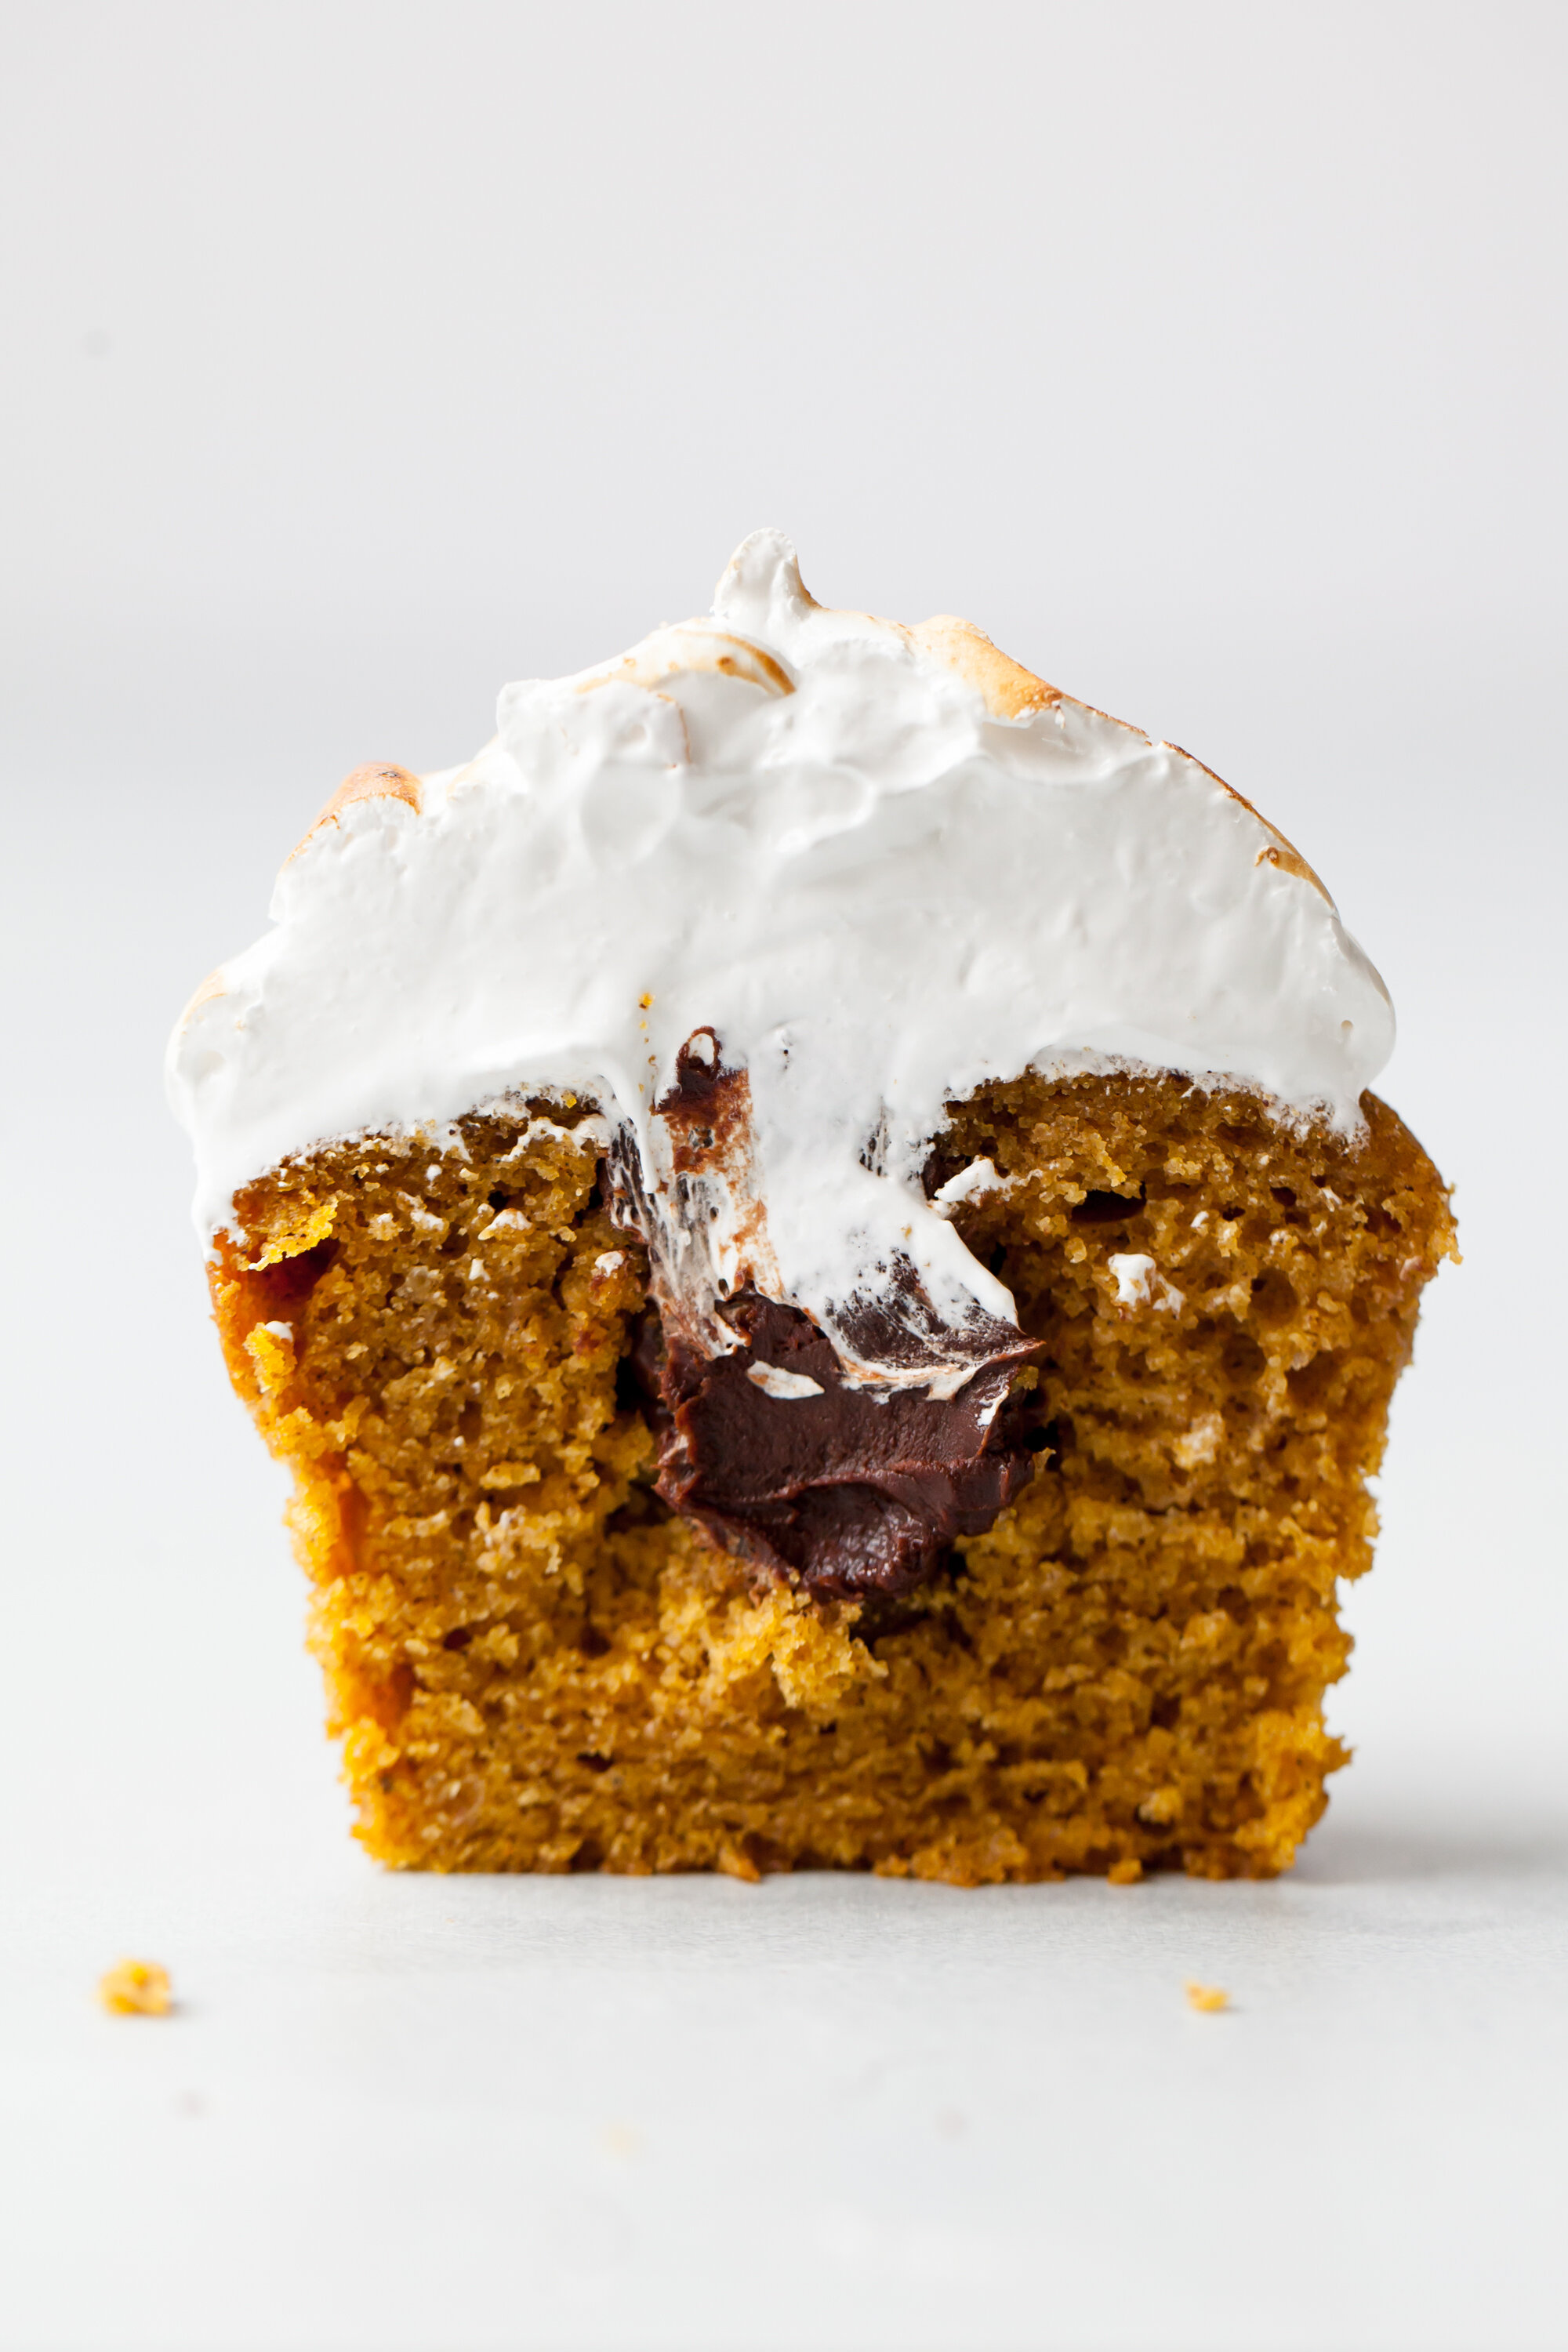 Pumpkin S’mores Cupcakes with ganache filling and toasted meringue topping.